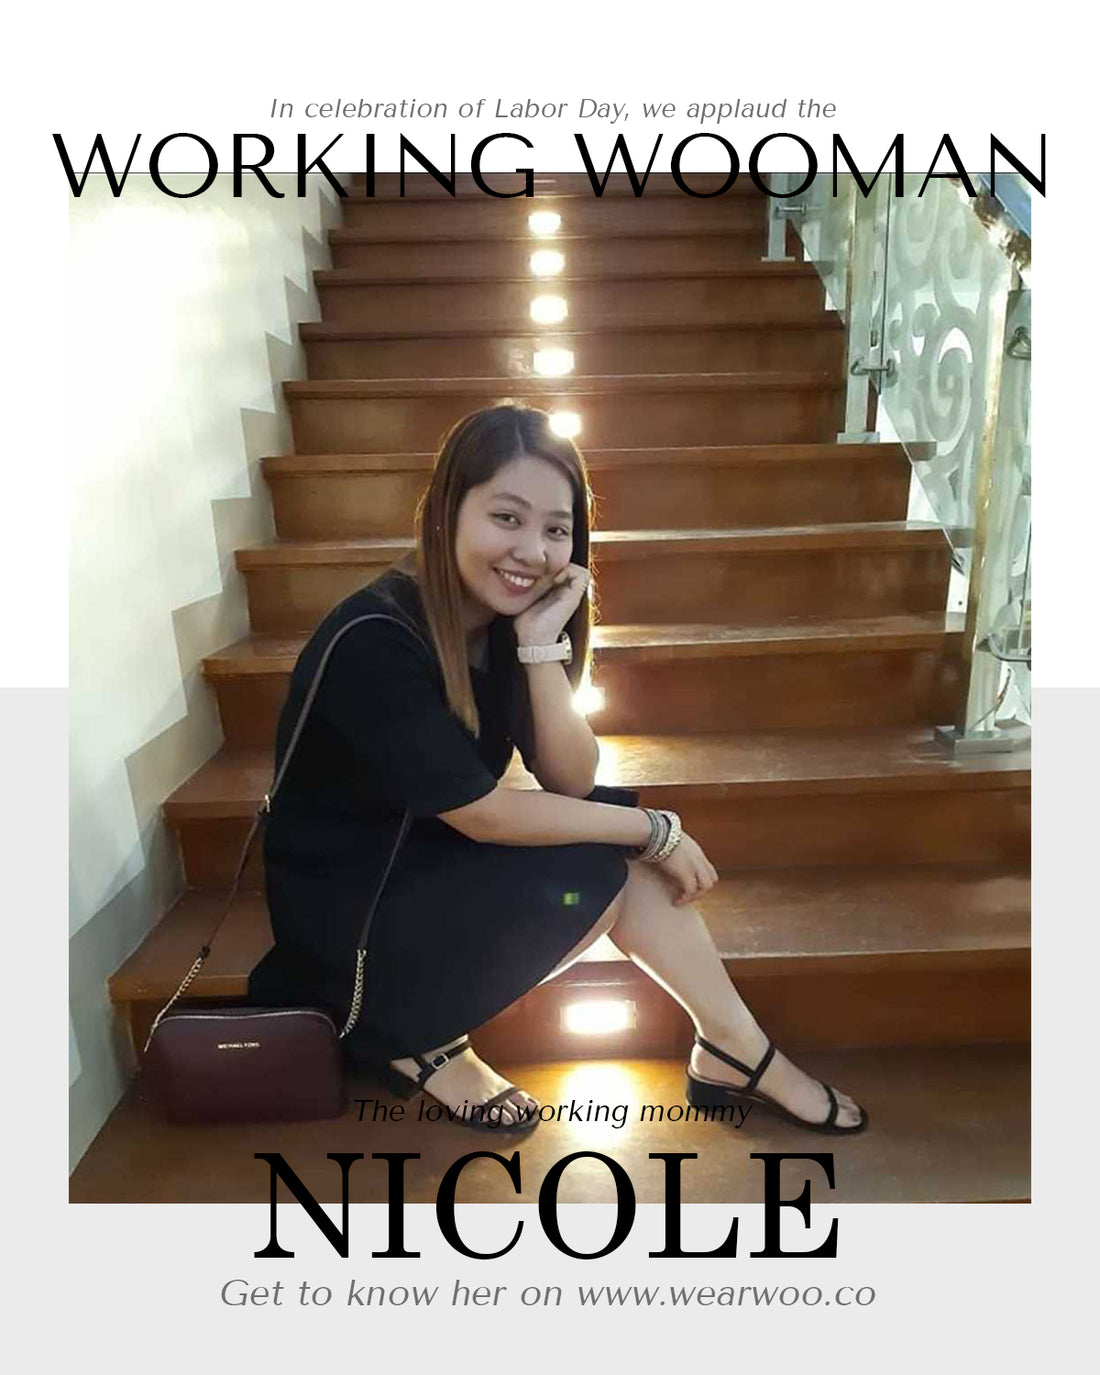 Meet the loving working mommy, Nicole